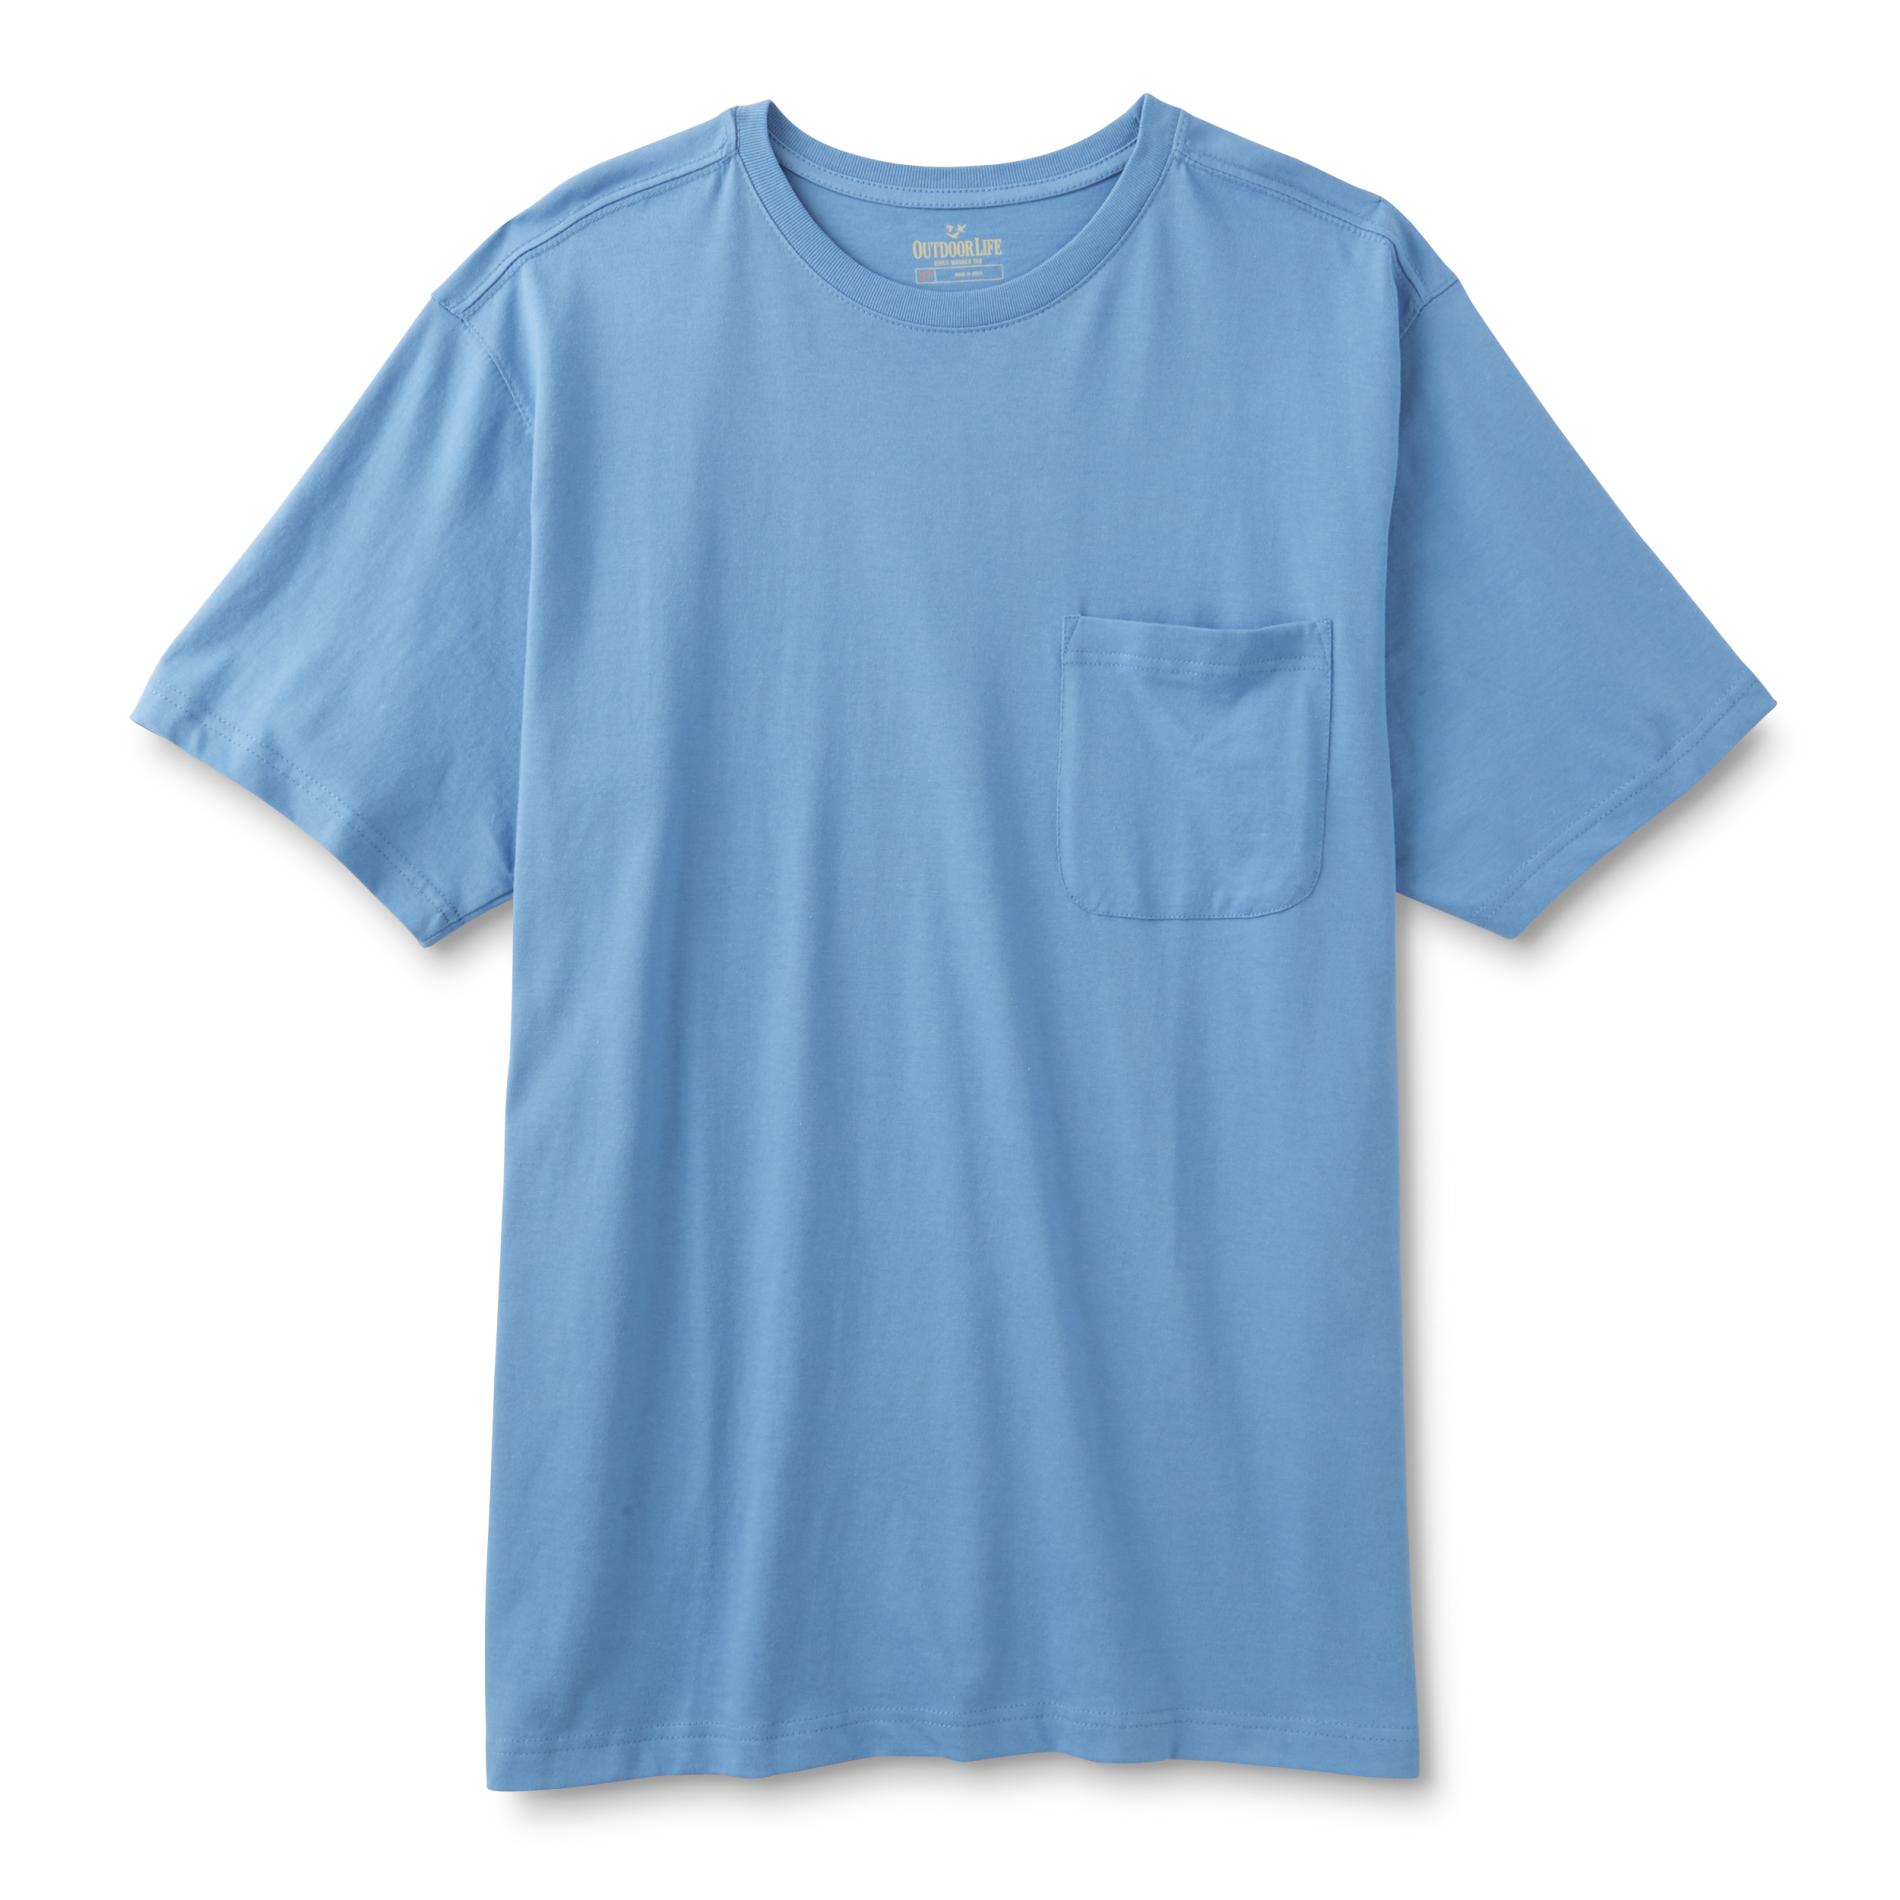 Outdoor Life Men's Big & Tall River Washed T-Shirt